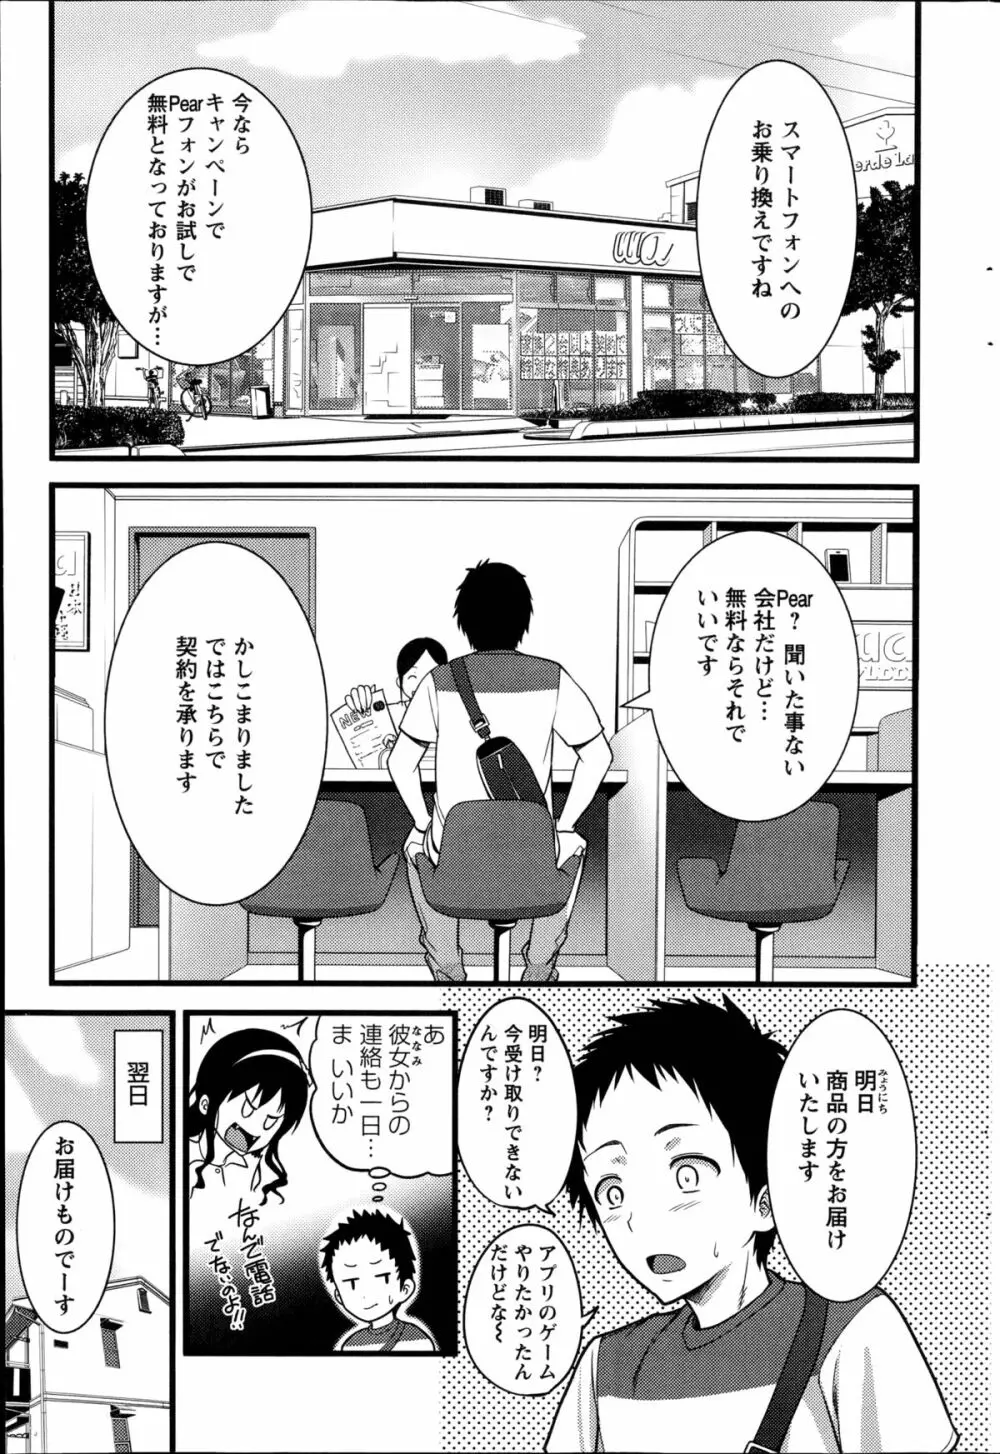 Pear Phone 第1-2章 Page.1